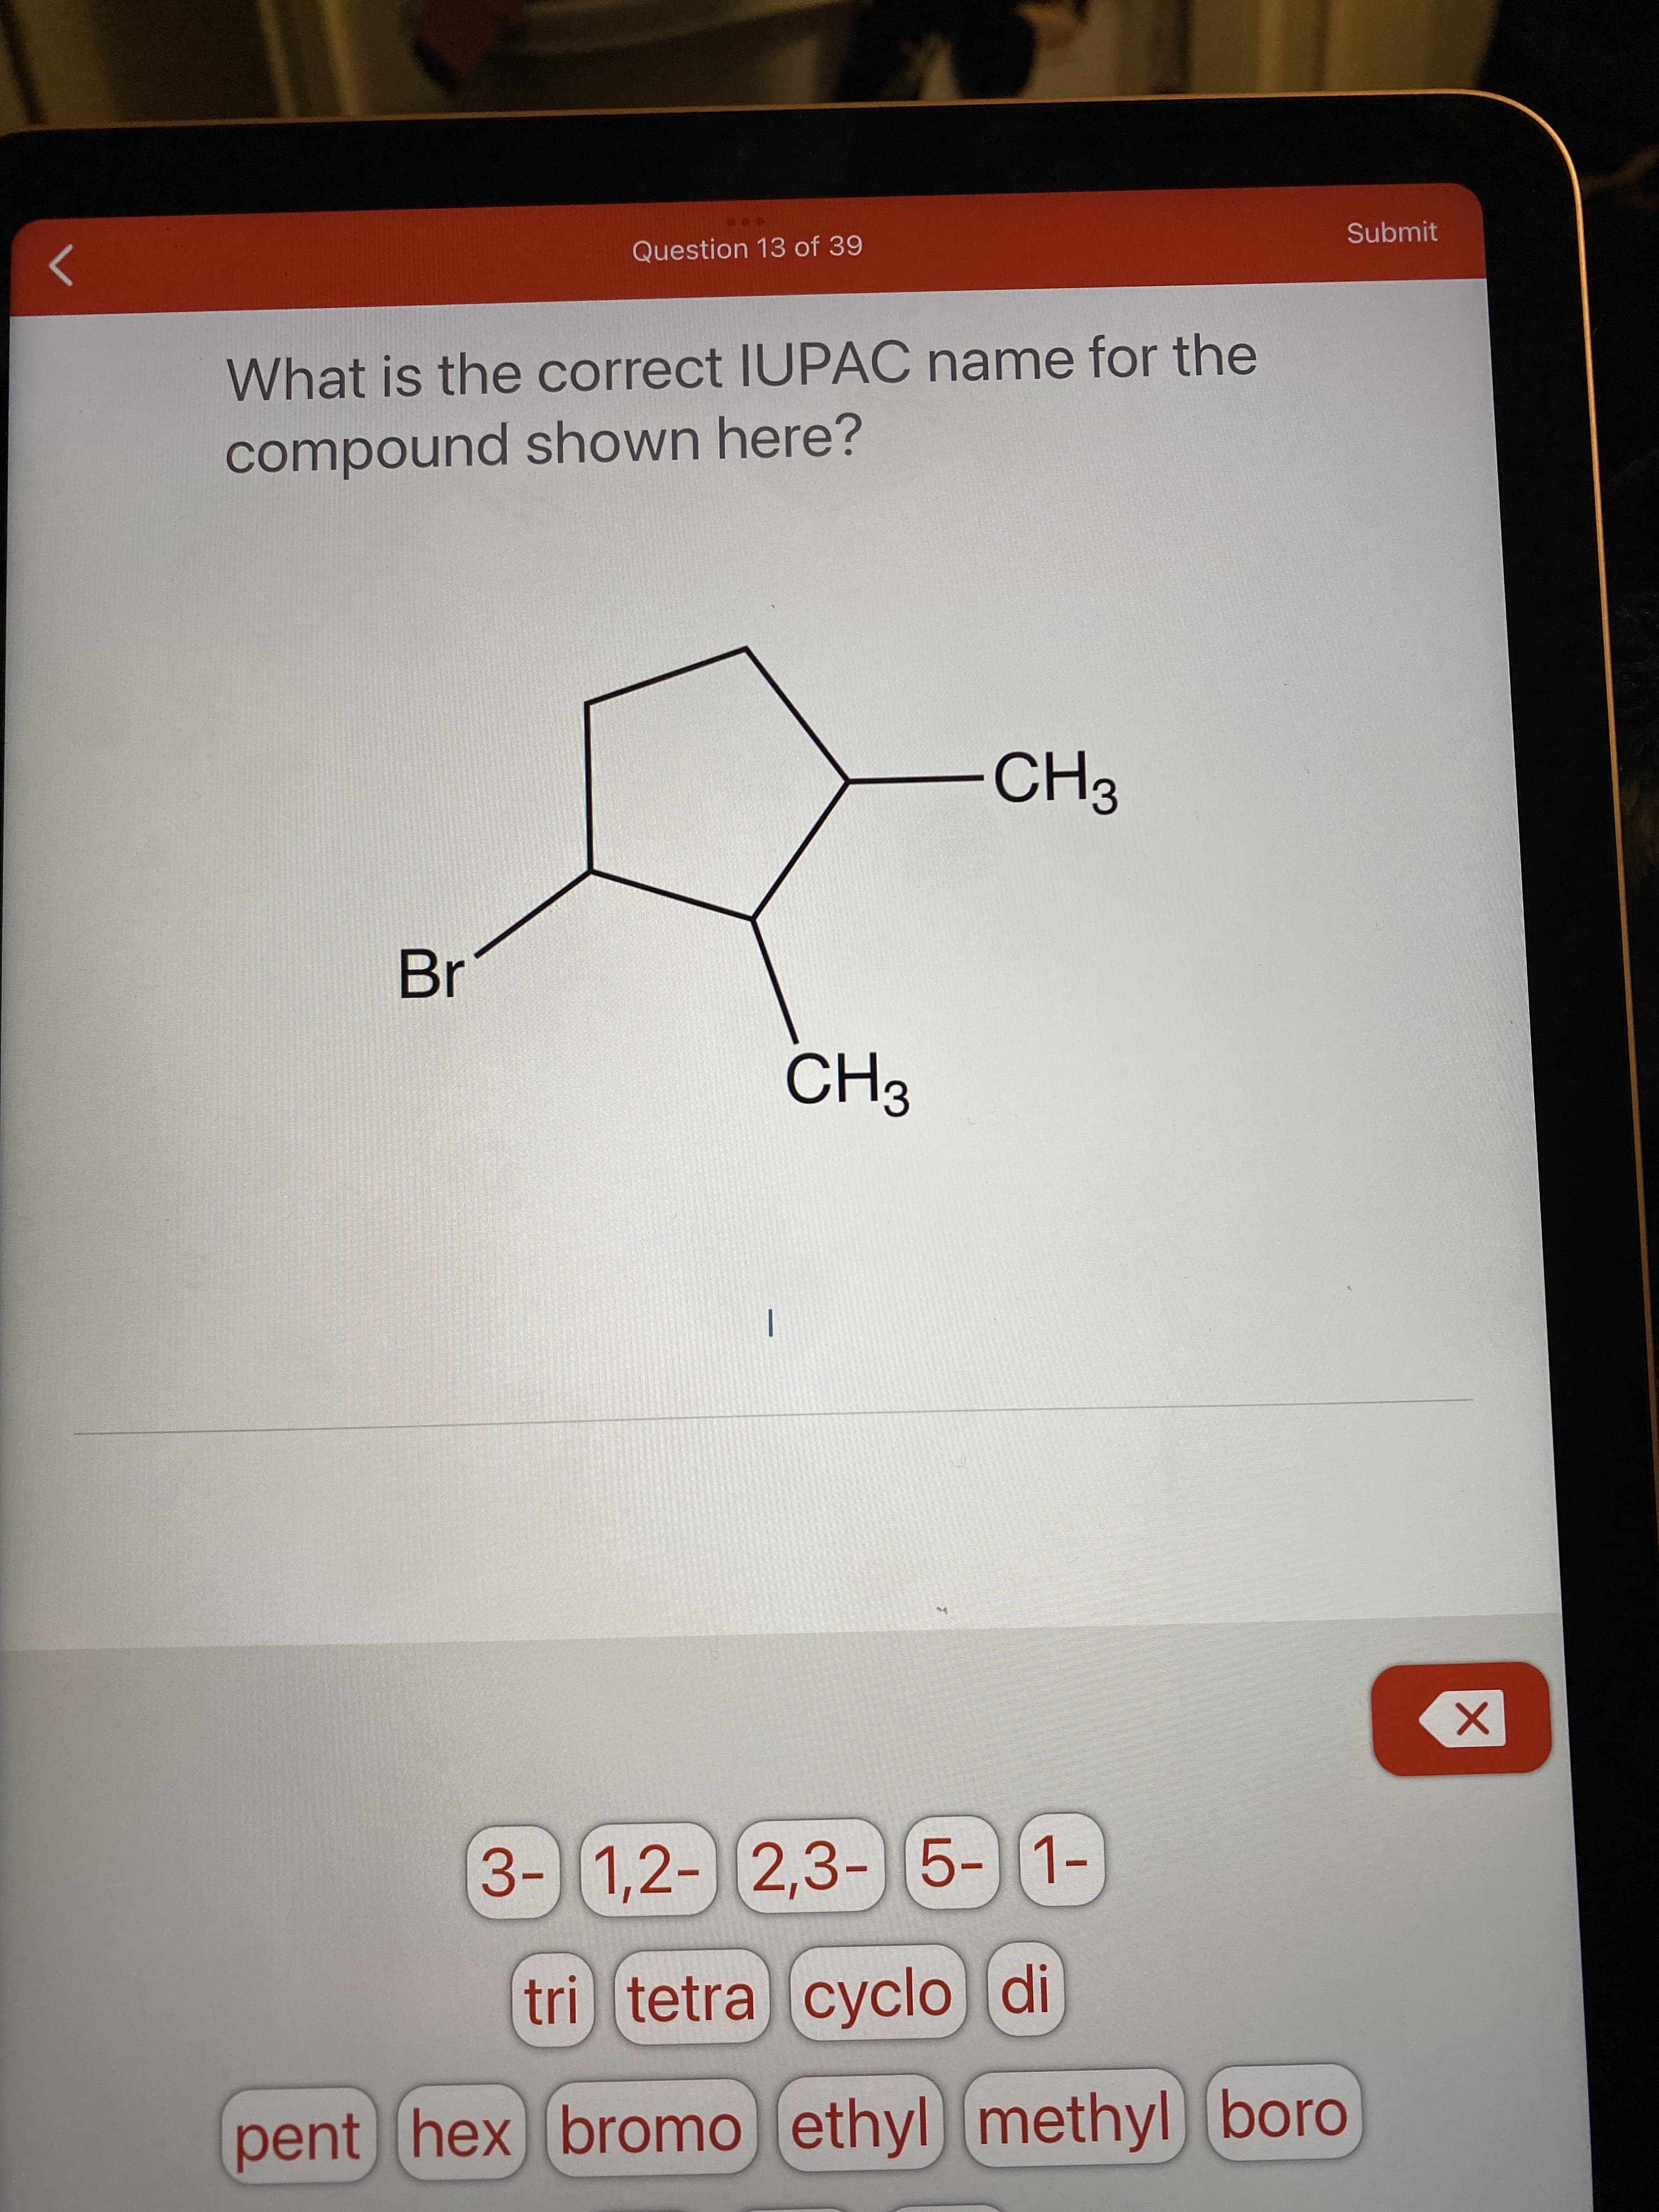 ...
Question 13 of 39
Submit
What is the correct IUPAC name for the
compound shown here?
Br
|
3-)5-)[1-
1,2- 2,3-
tri) tetra cyclo di
pent hex bromo ethyl
methyl boro
